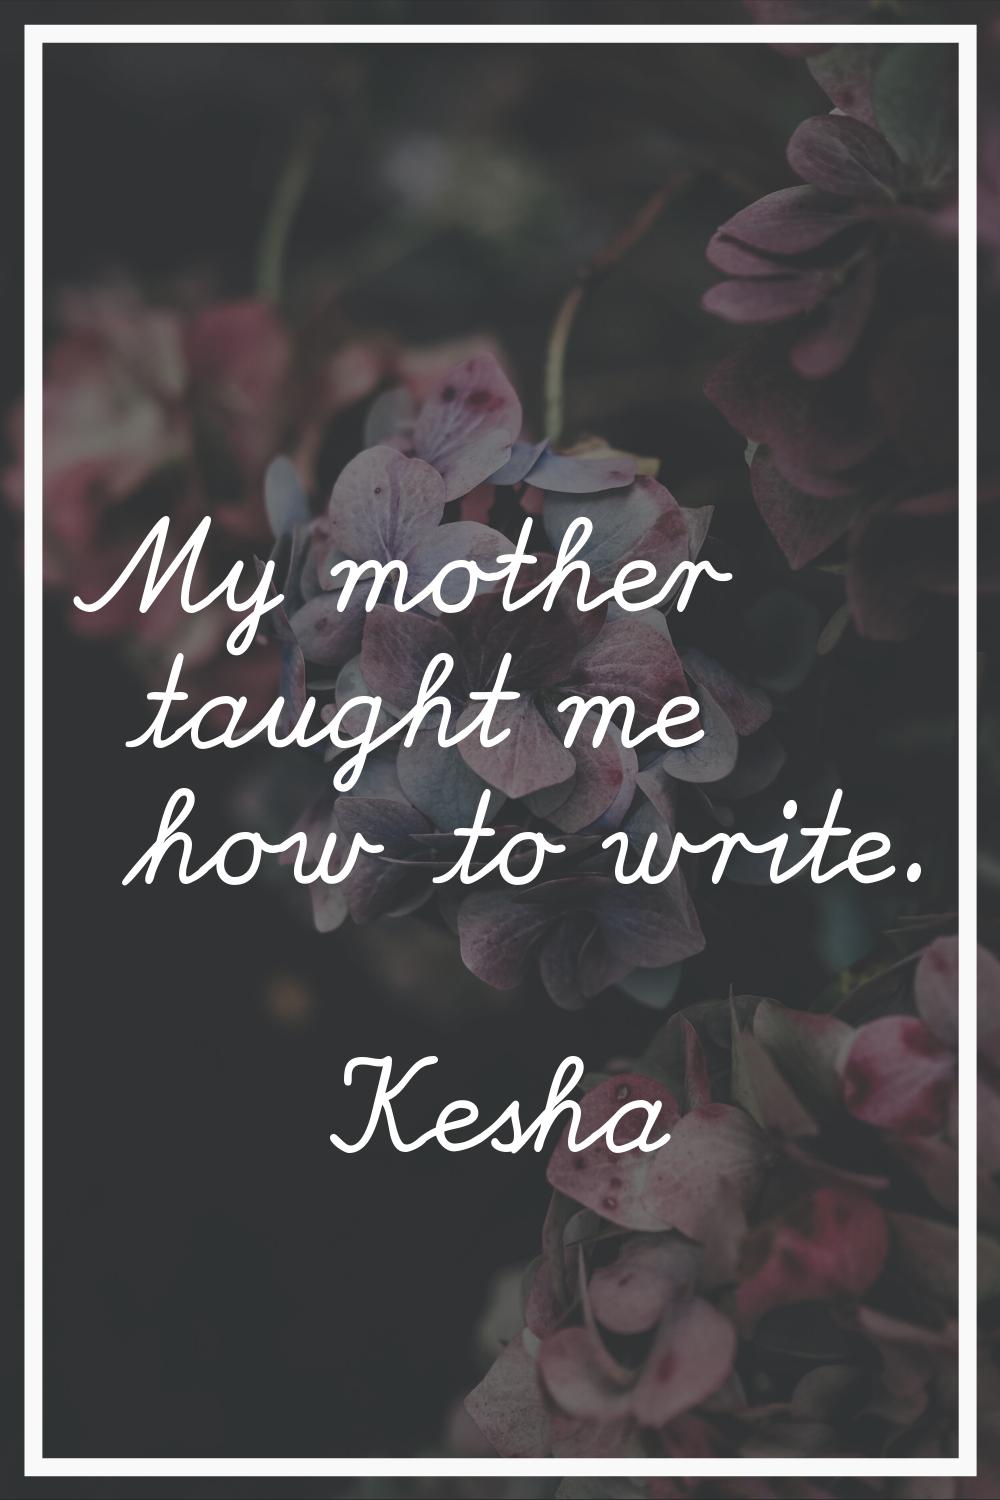 My mother taught me how to write.